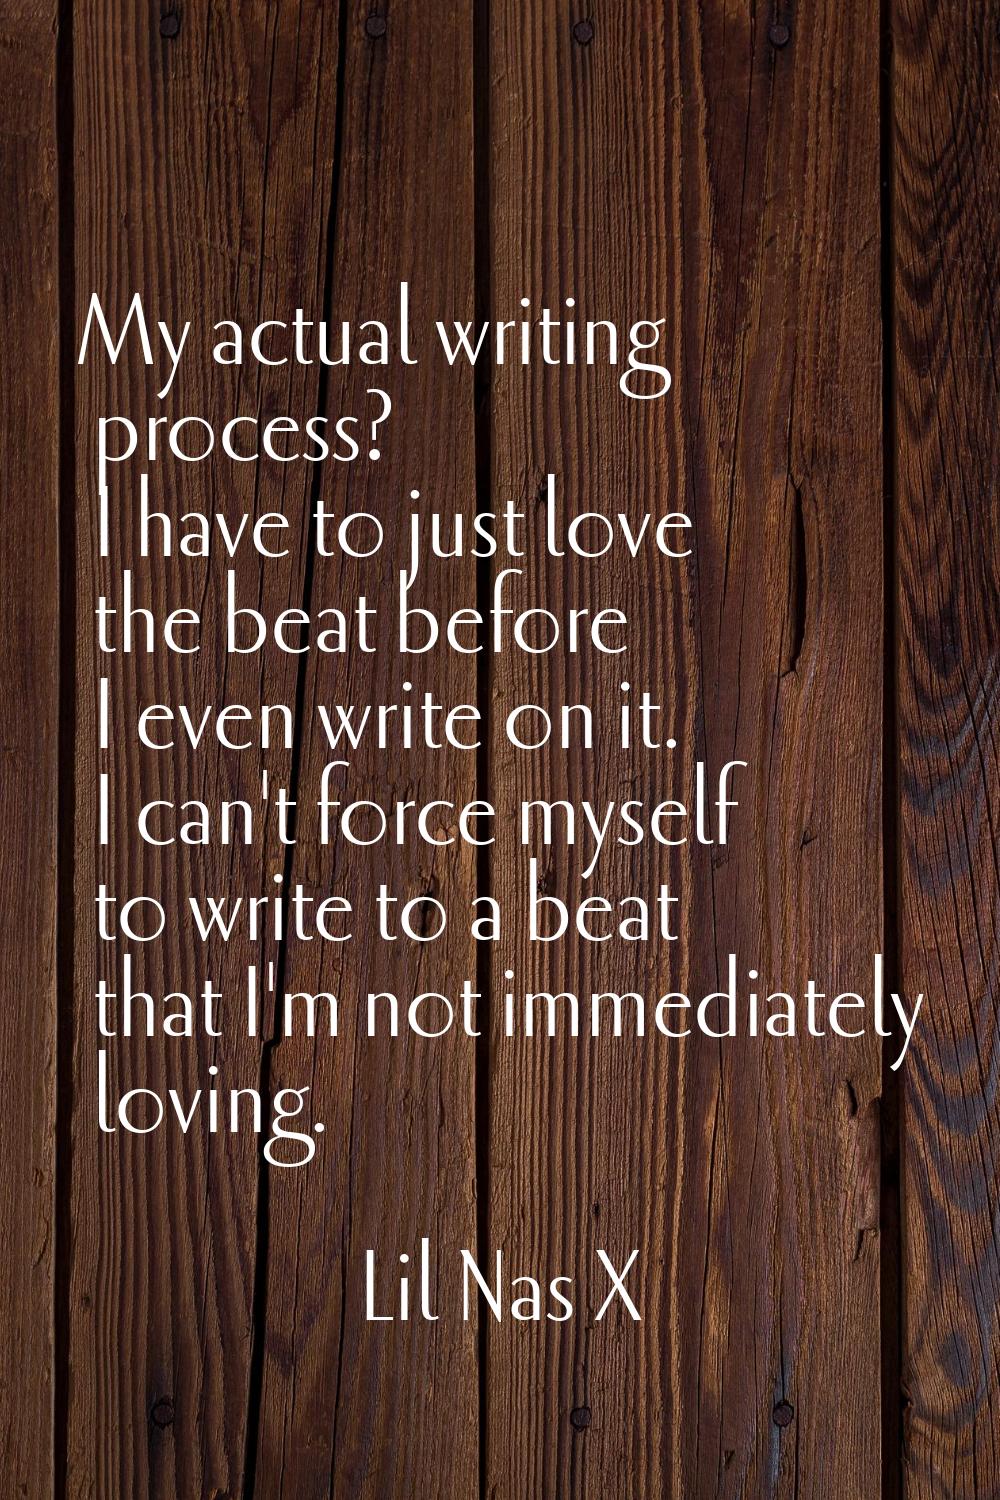 My actual writing process? I have to just love the beat before I even write on it. I can't force my